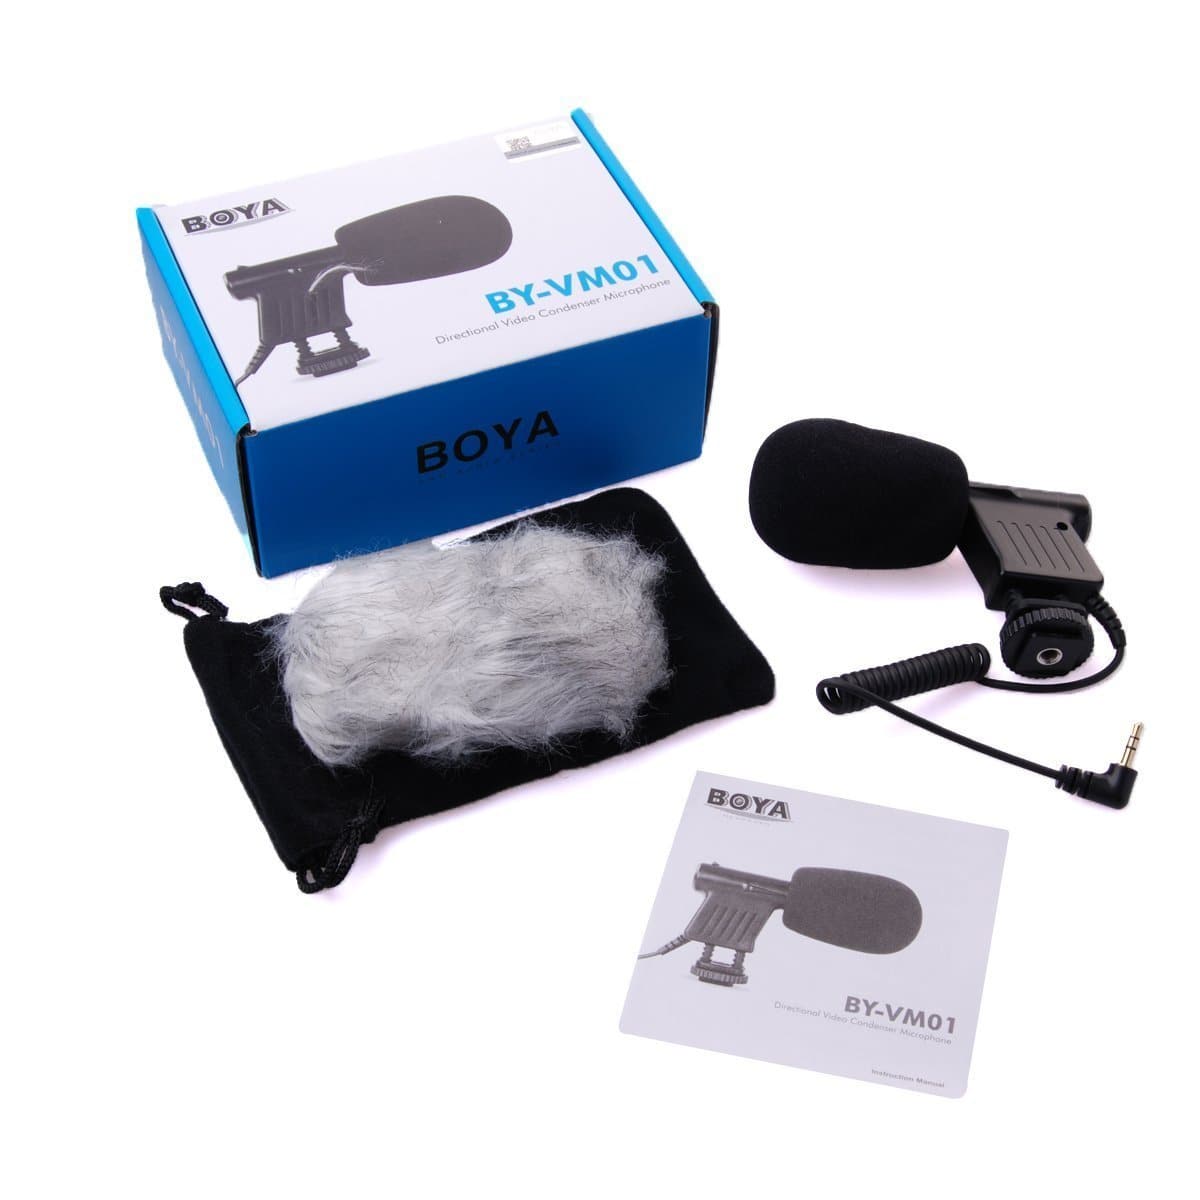 Boya BY-VM01 Unidirectional Camera Microphone for DSLRs and Camcorders